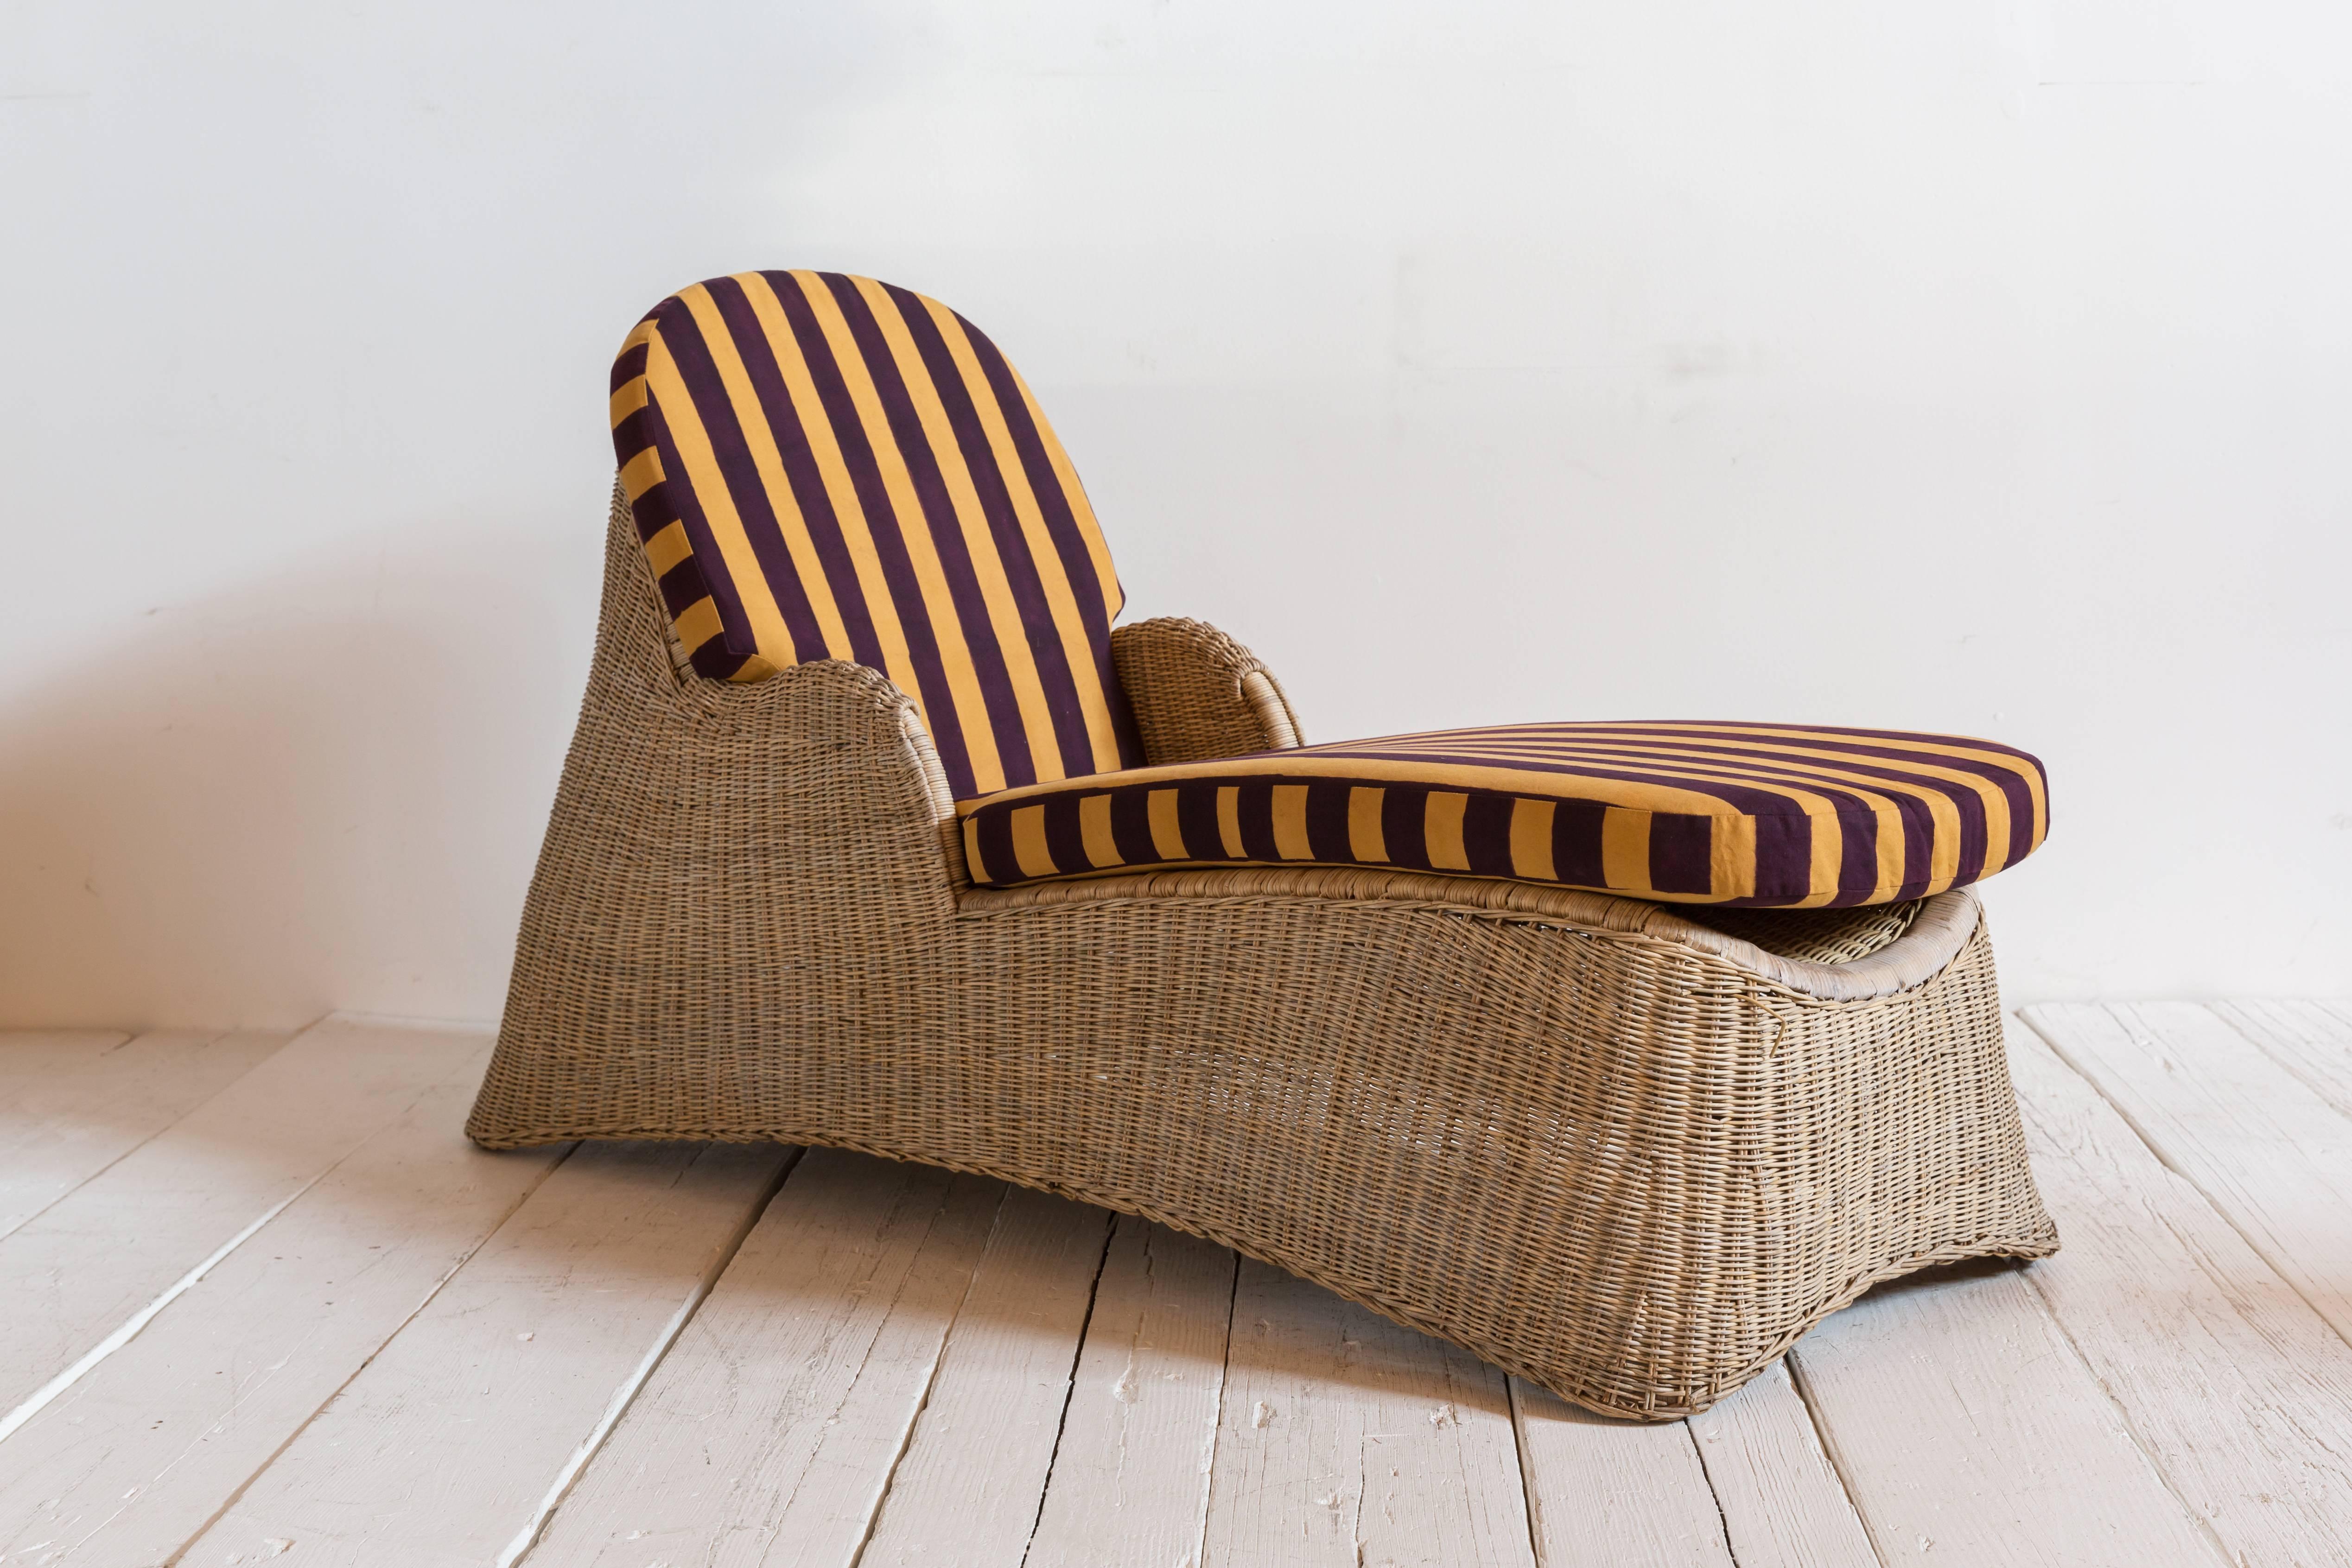 Late 20th Century Wicker Chaise Newly Upholstered in Lisa Corti Purple and Yellow Striped Fabric